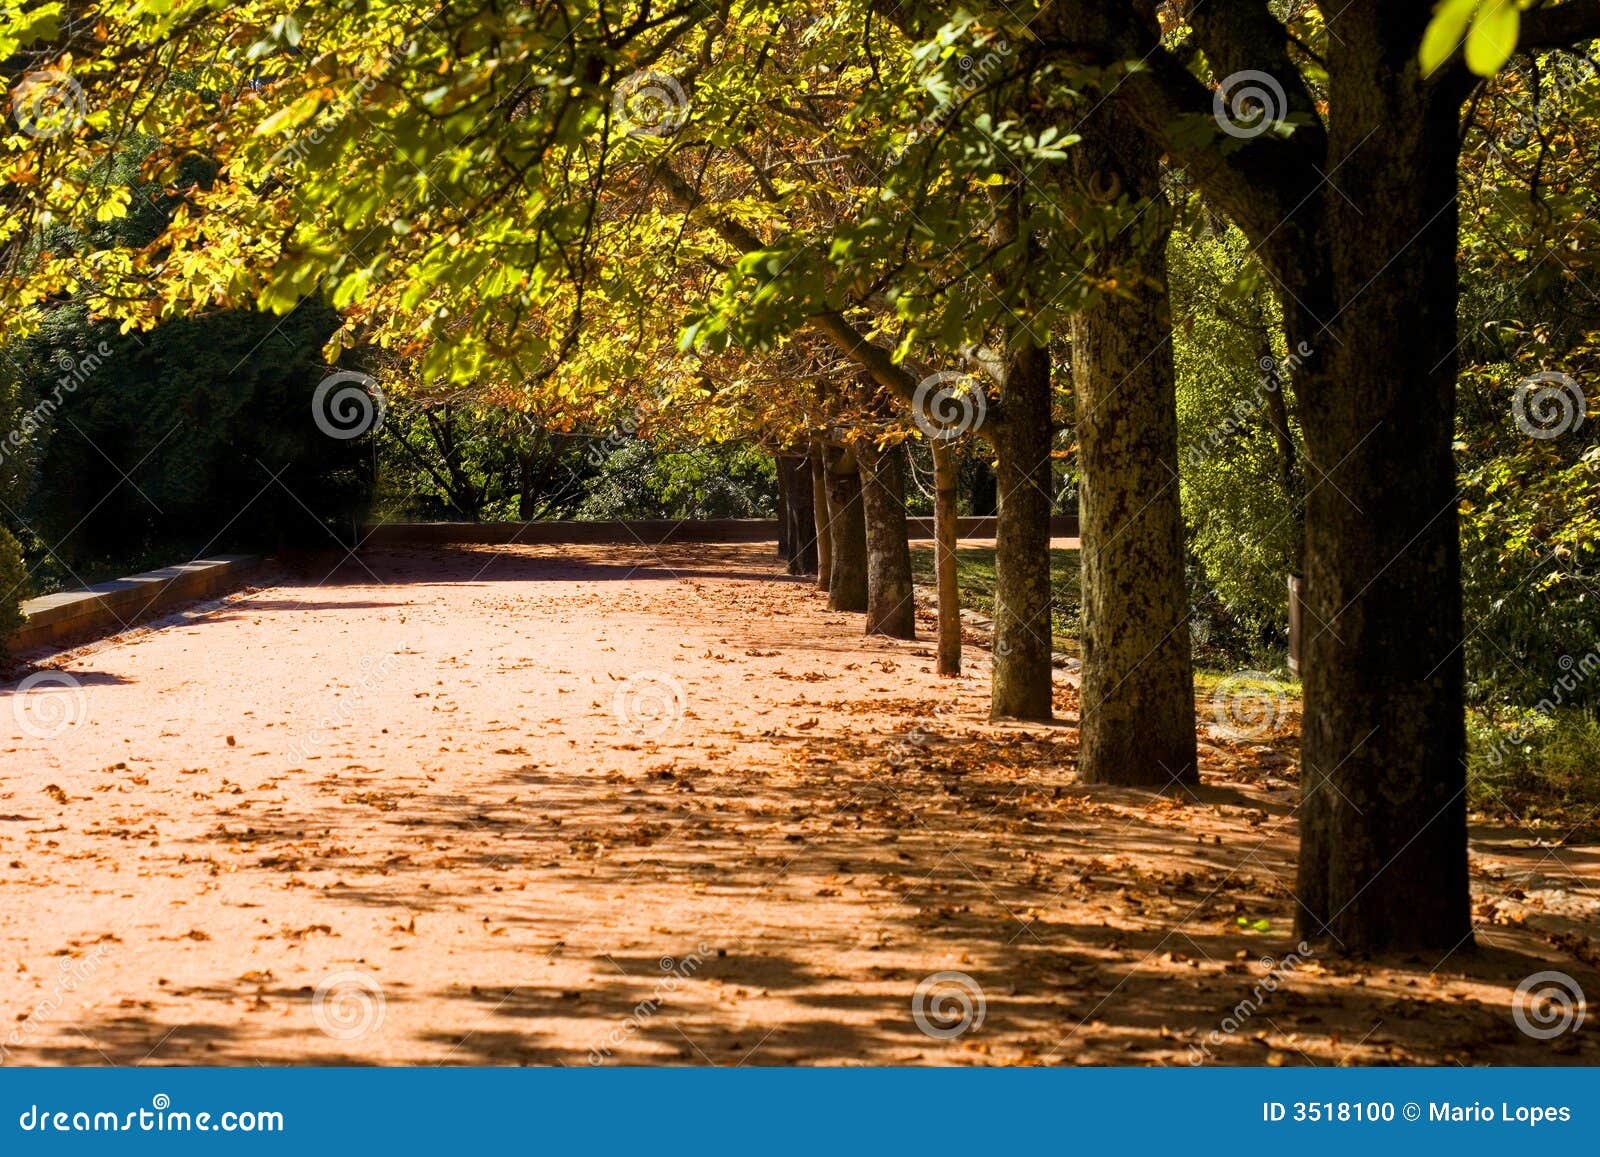 Fall in Public Park with Typical Autumn Colors Stock Photo - Image of ...